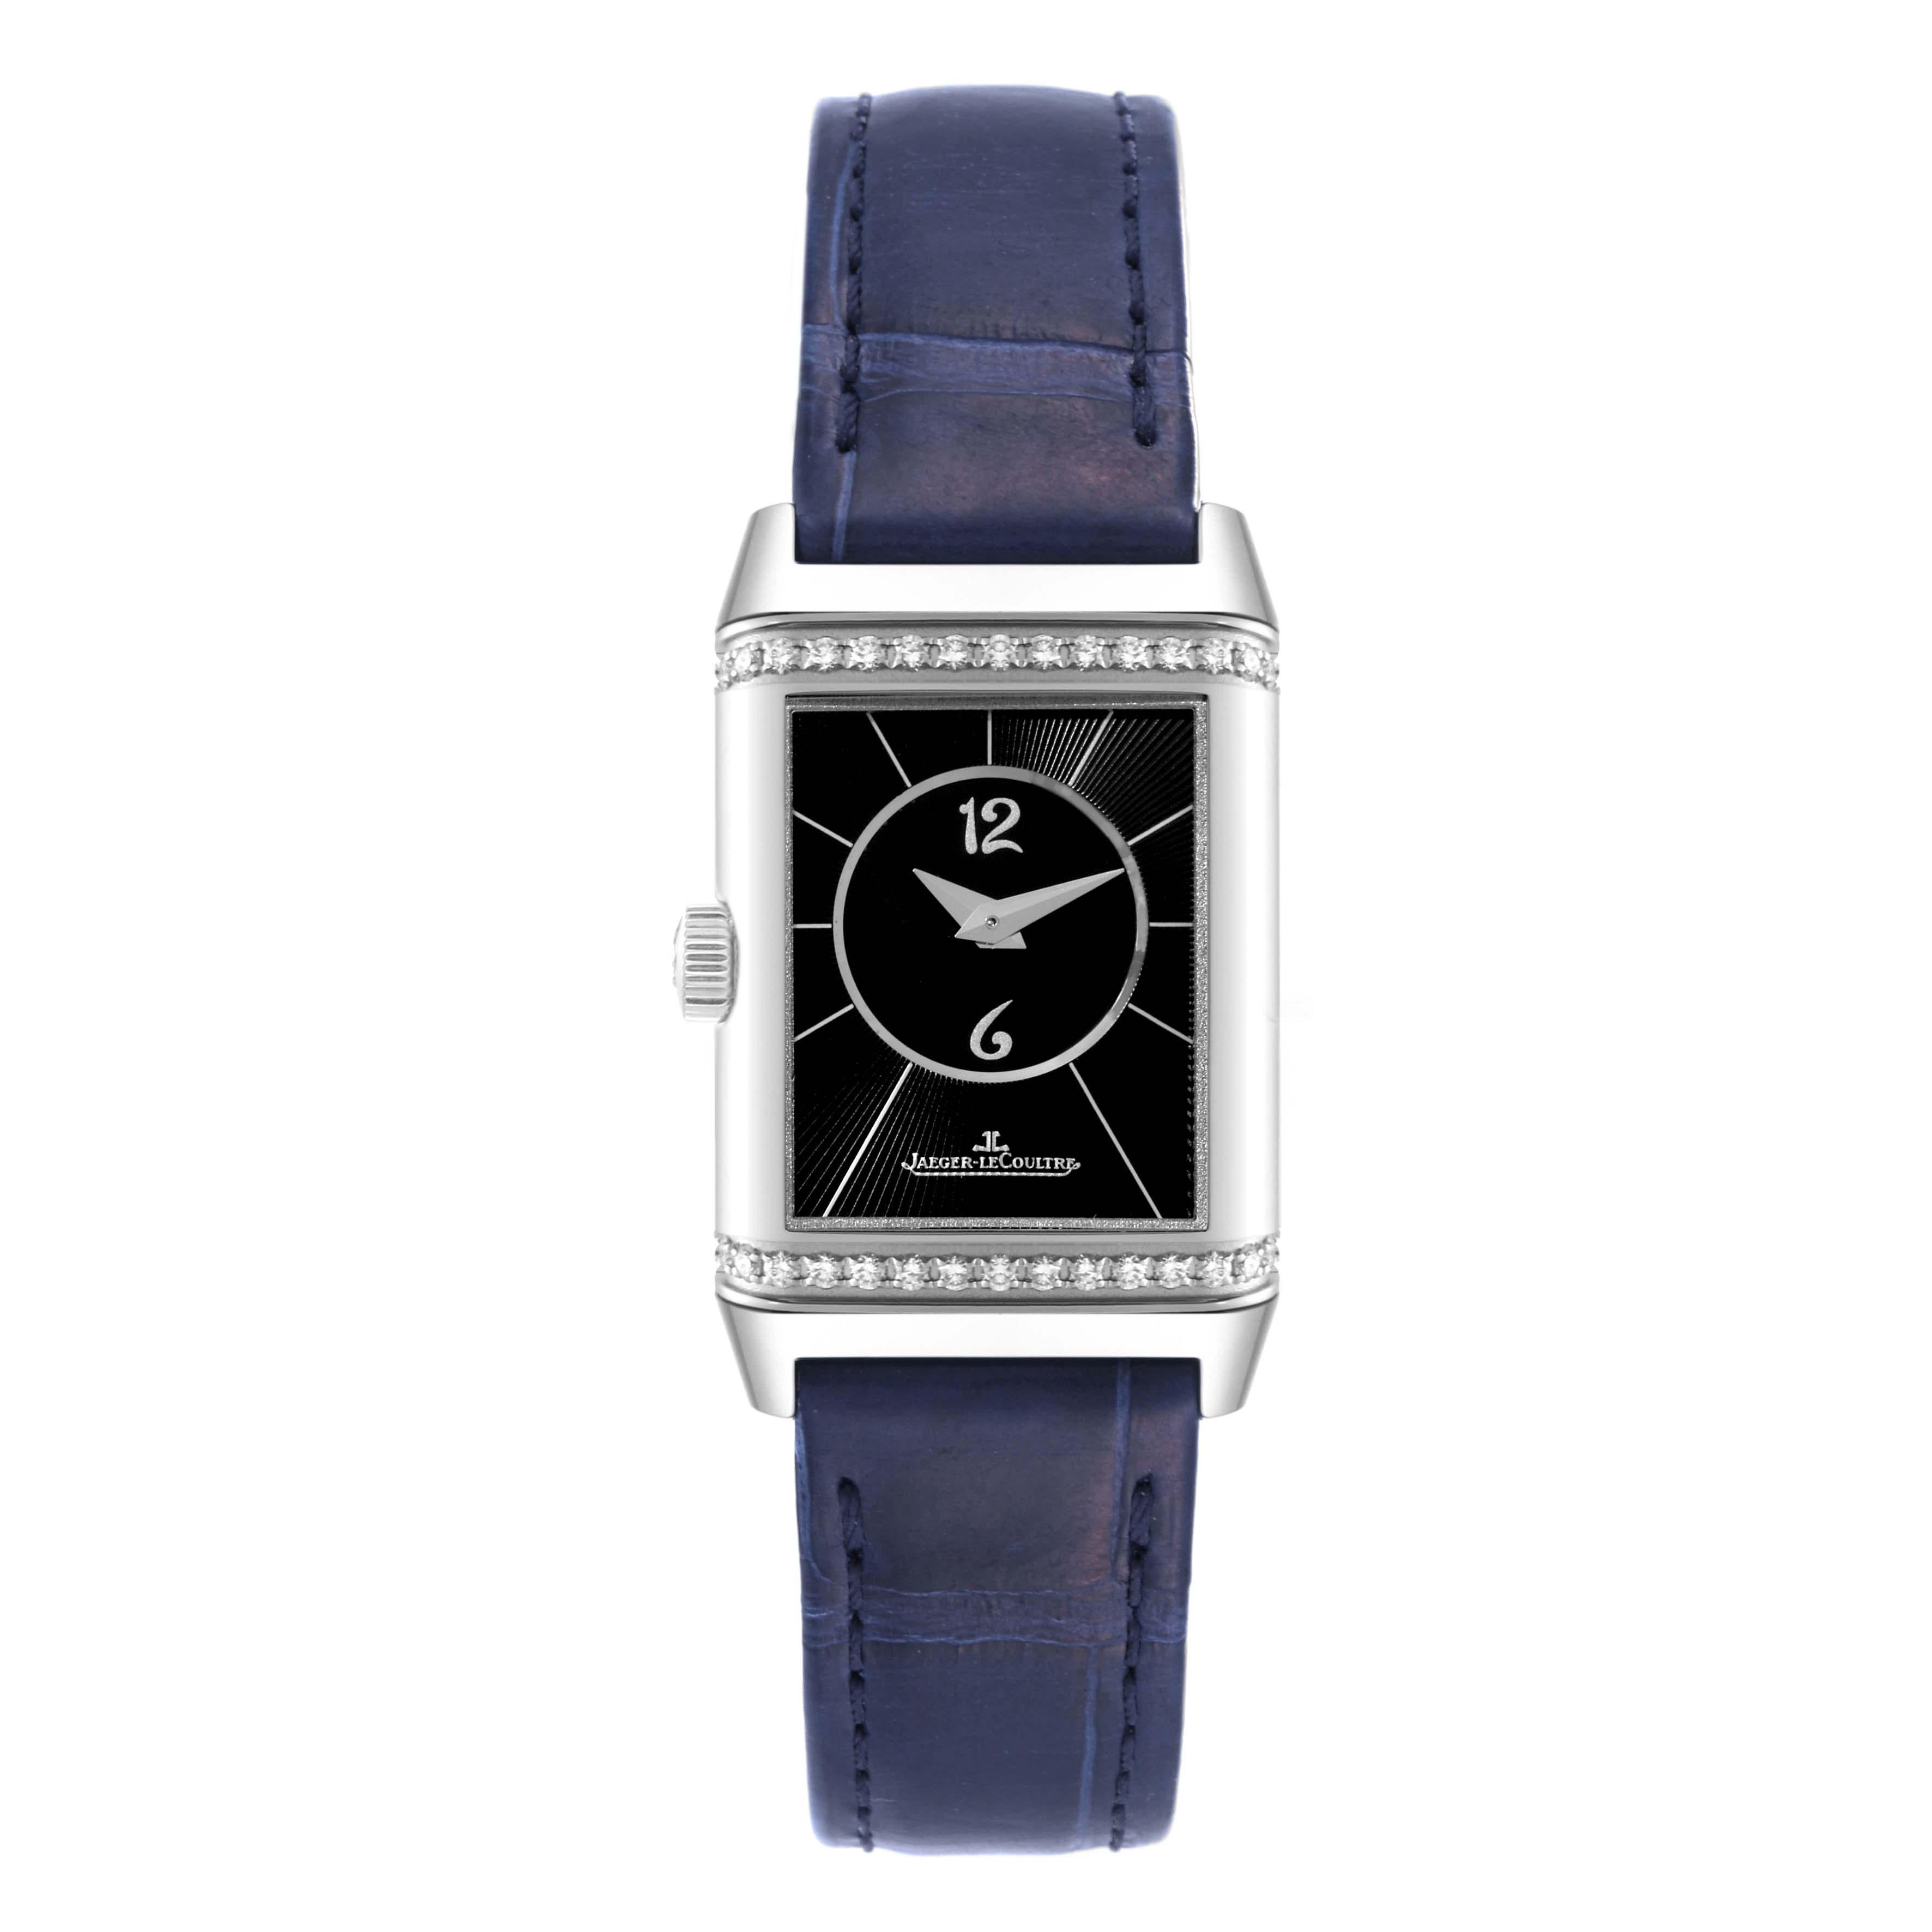 Jaeger LeCoultre Reverso Duetto Steel Diamond Ladies Watch 211.8.44 Q2668432 Box Card. Manual winding movement. Stainless steel 21.0 x 34.2 mm case rectangular case with reeded ends, rotating within its back plate. Stainless steel reeded bezel on